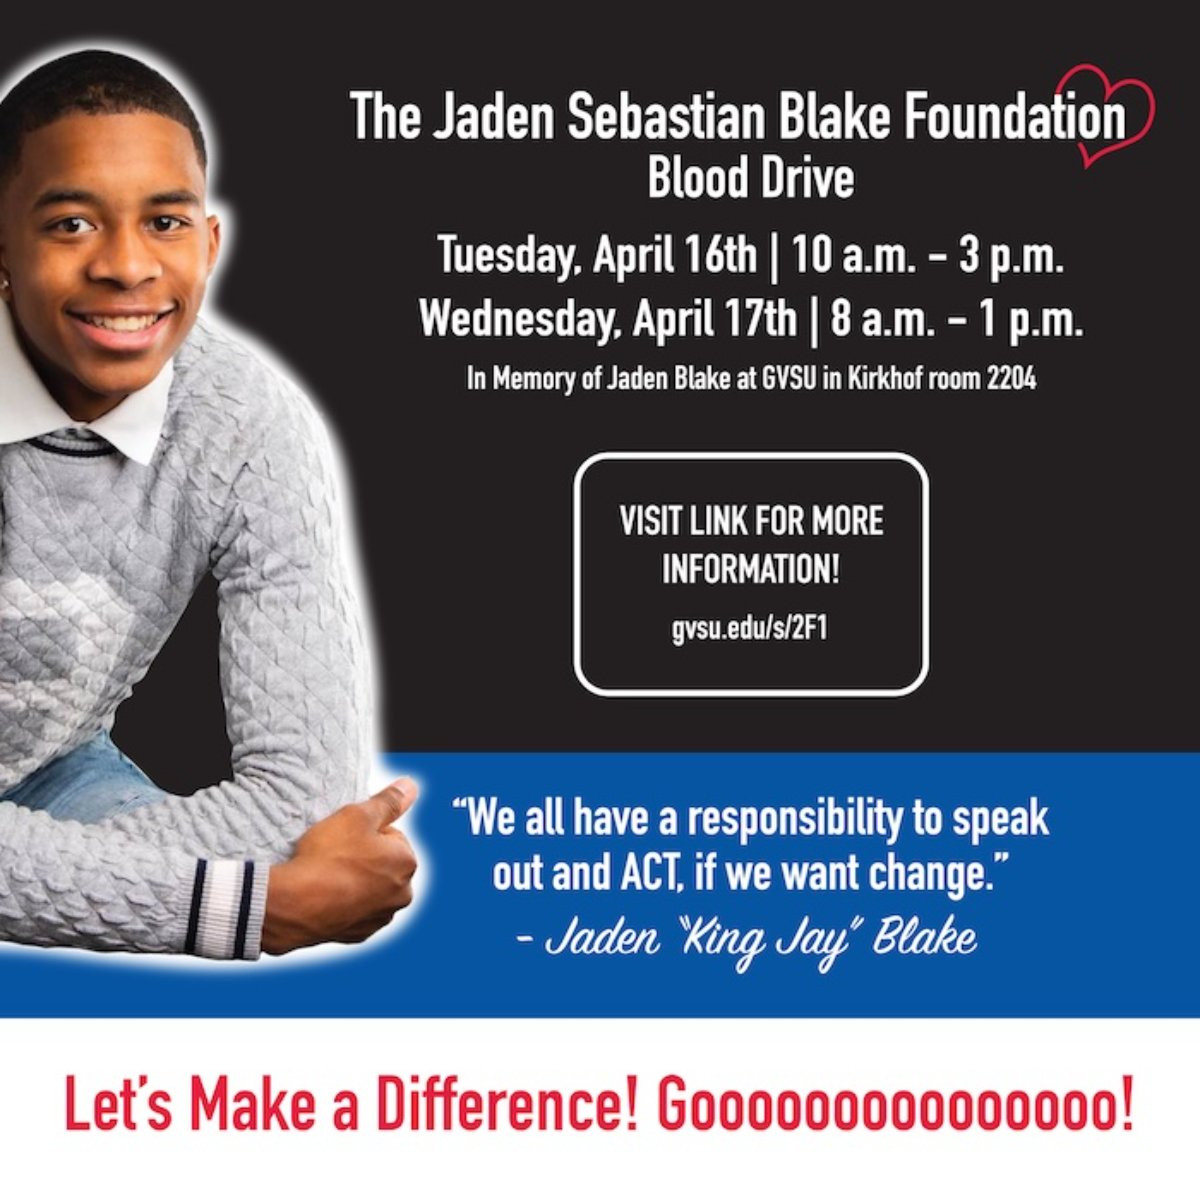 Jaden Blake with text that says Jaden Sebastion Blake Foundation Blood Drive Tuesday, April 16th 10 am - 3 pm and Wednesday April 17 8am-1pm In Memory of Jaden Blake at GVSU in Kirkhof room 2204 Visit link for more informatin "We all have a responsibility